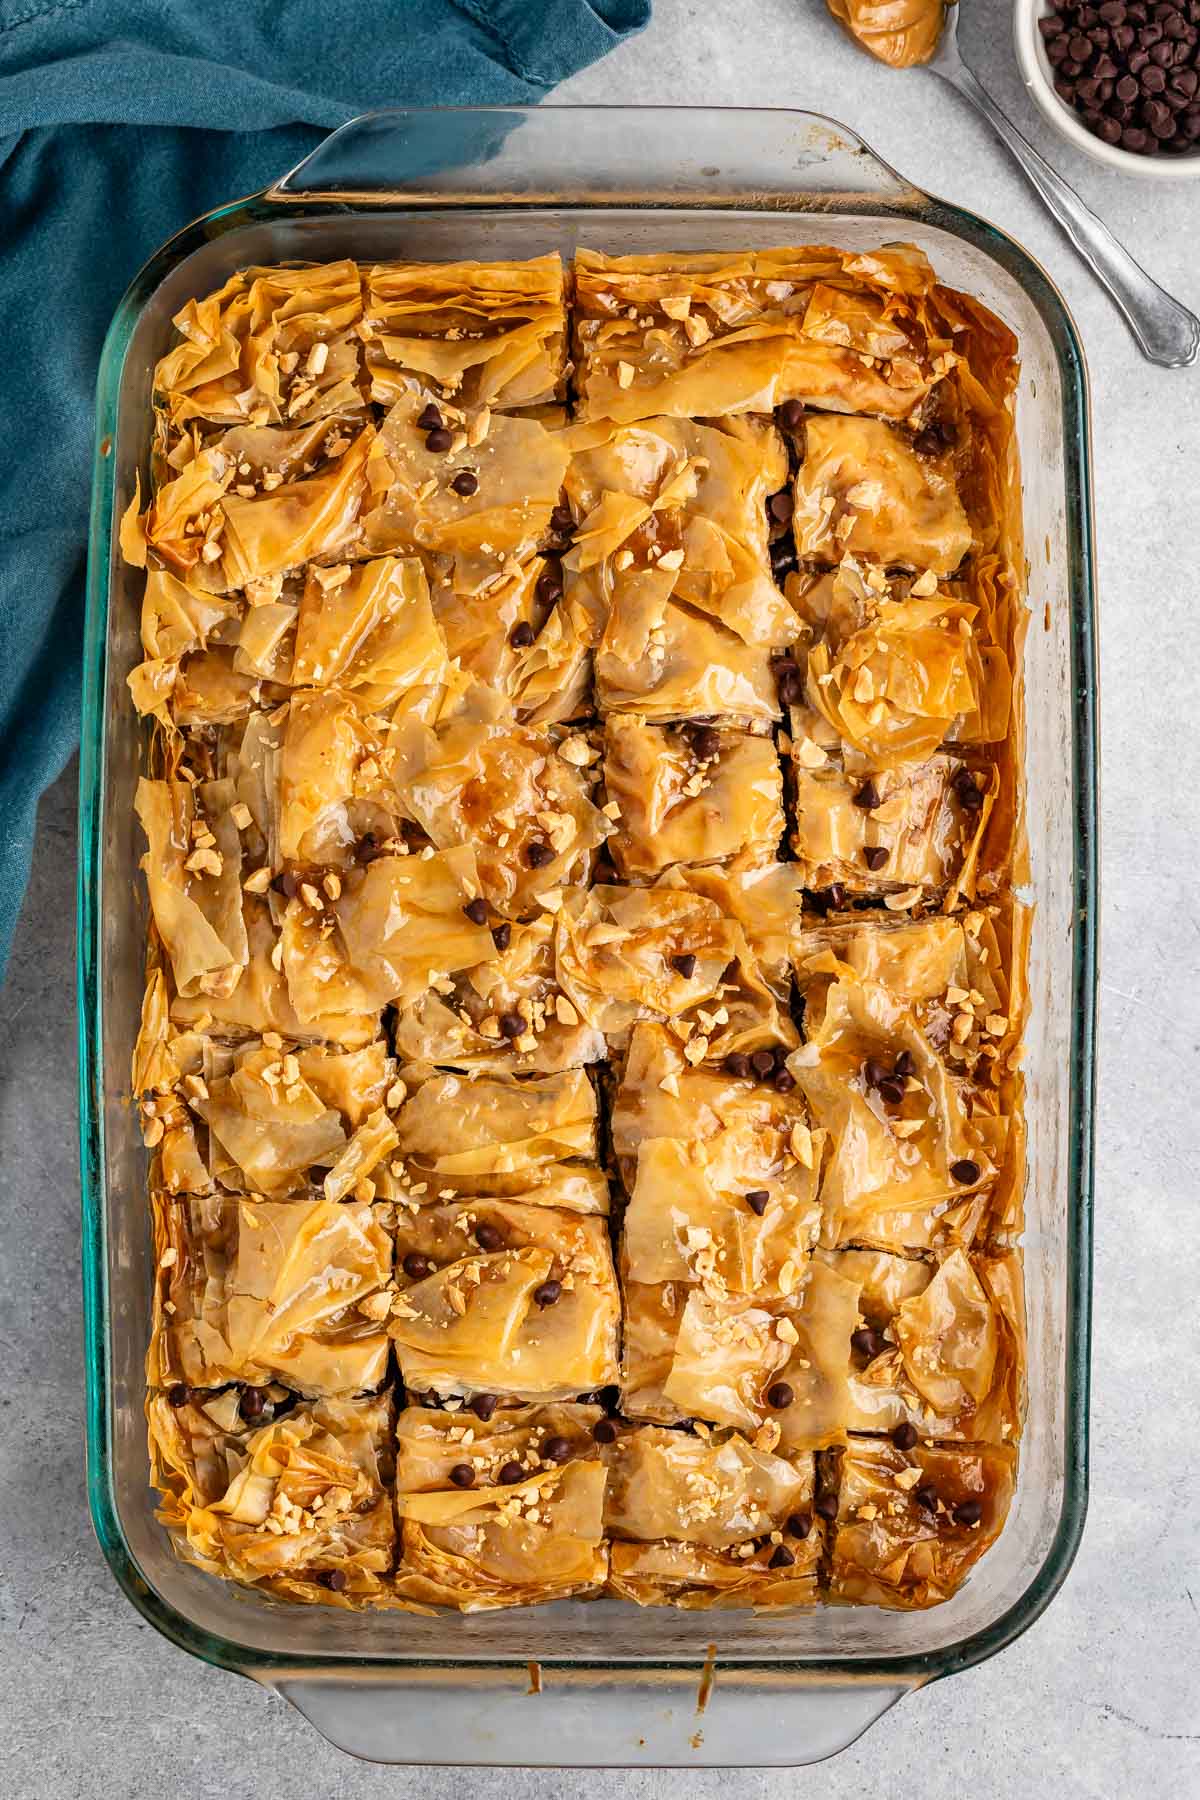 peanut butter baklava mixed with chocolate chips in a clear baking pan.